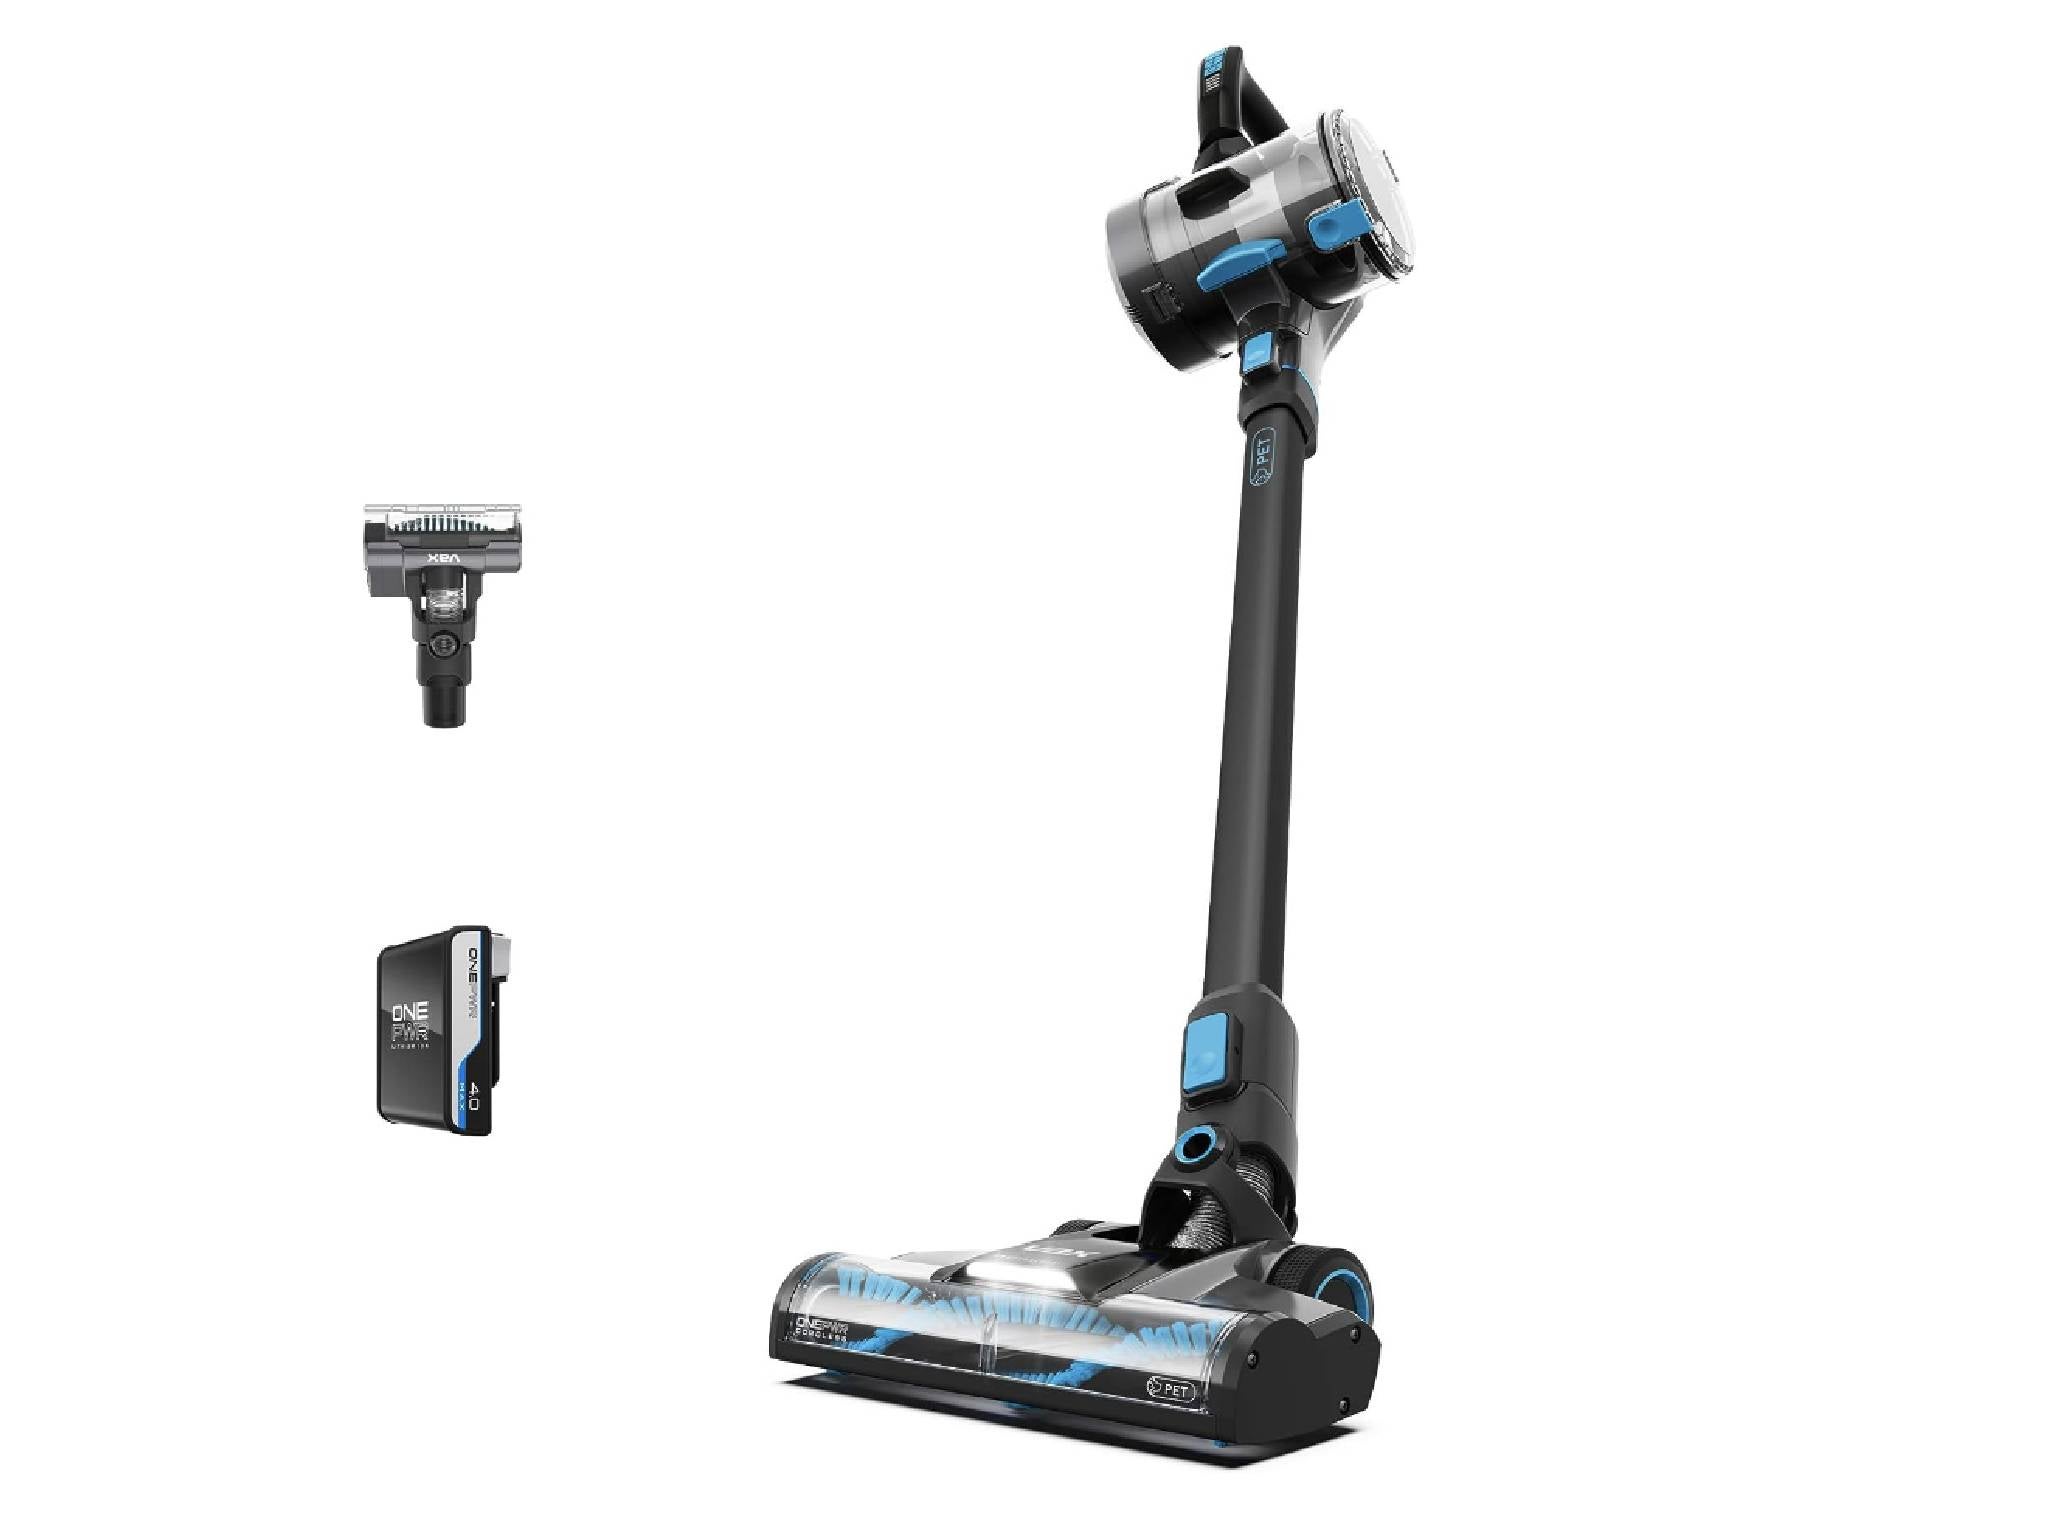 Vax onepwr blade 4 pet cordless vacuum cleaner